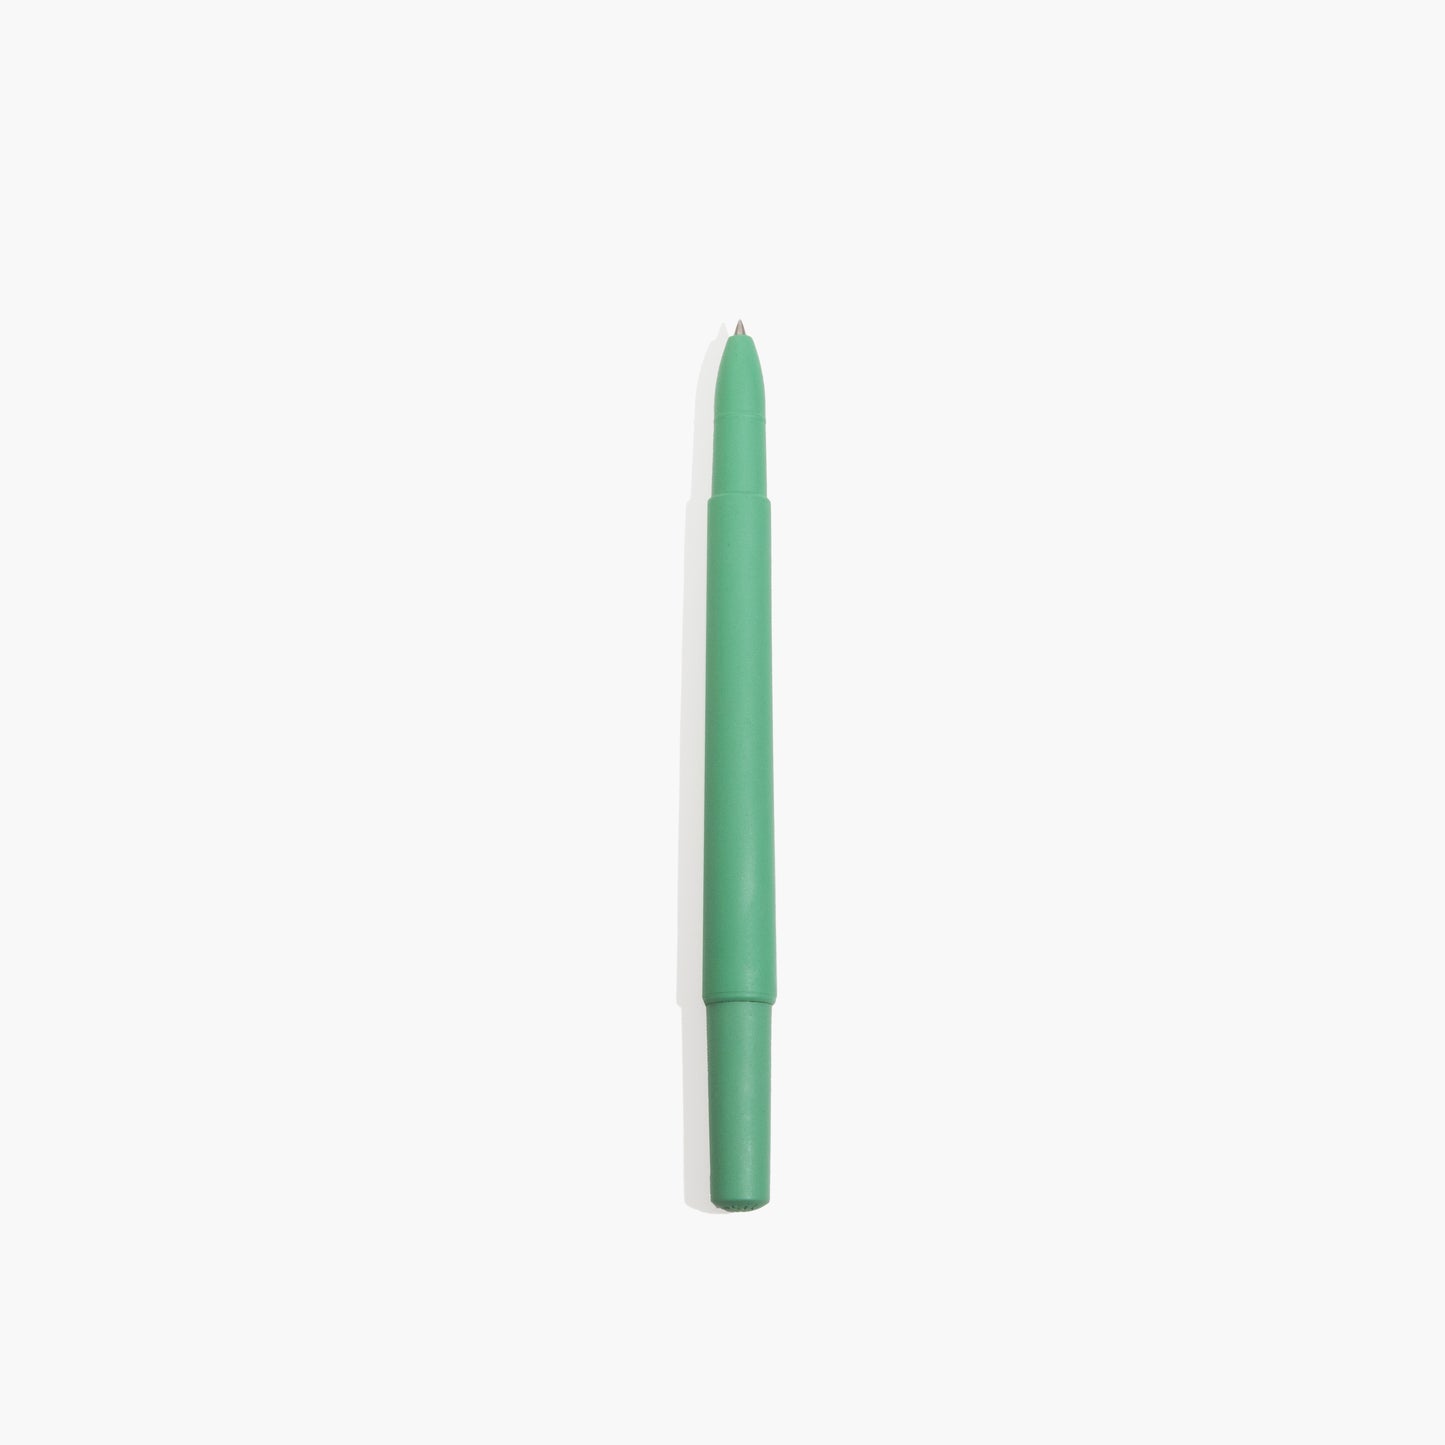 The Ciklo - Top Quality Recycled Pen